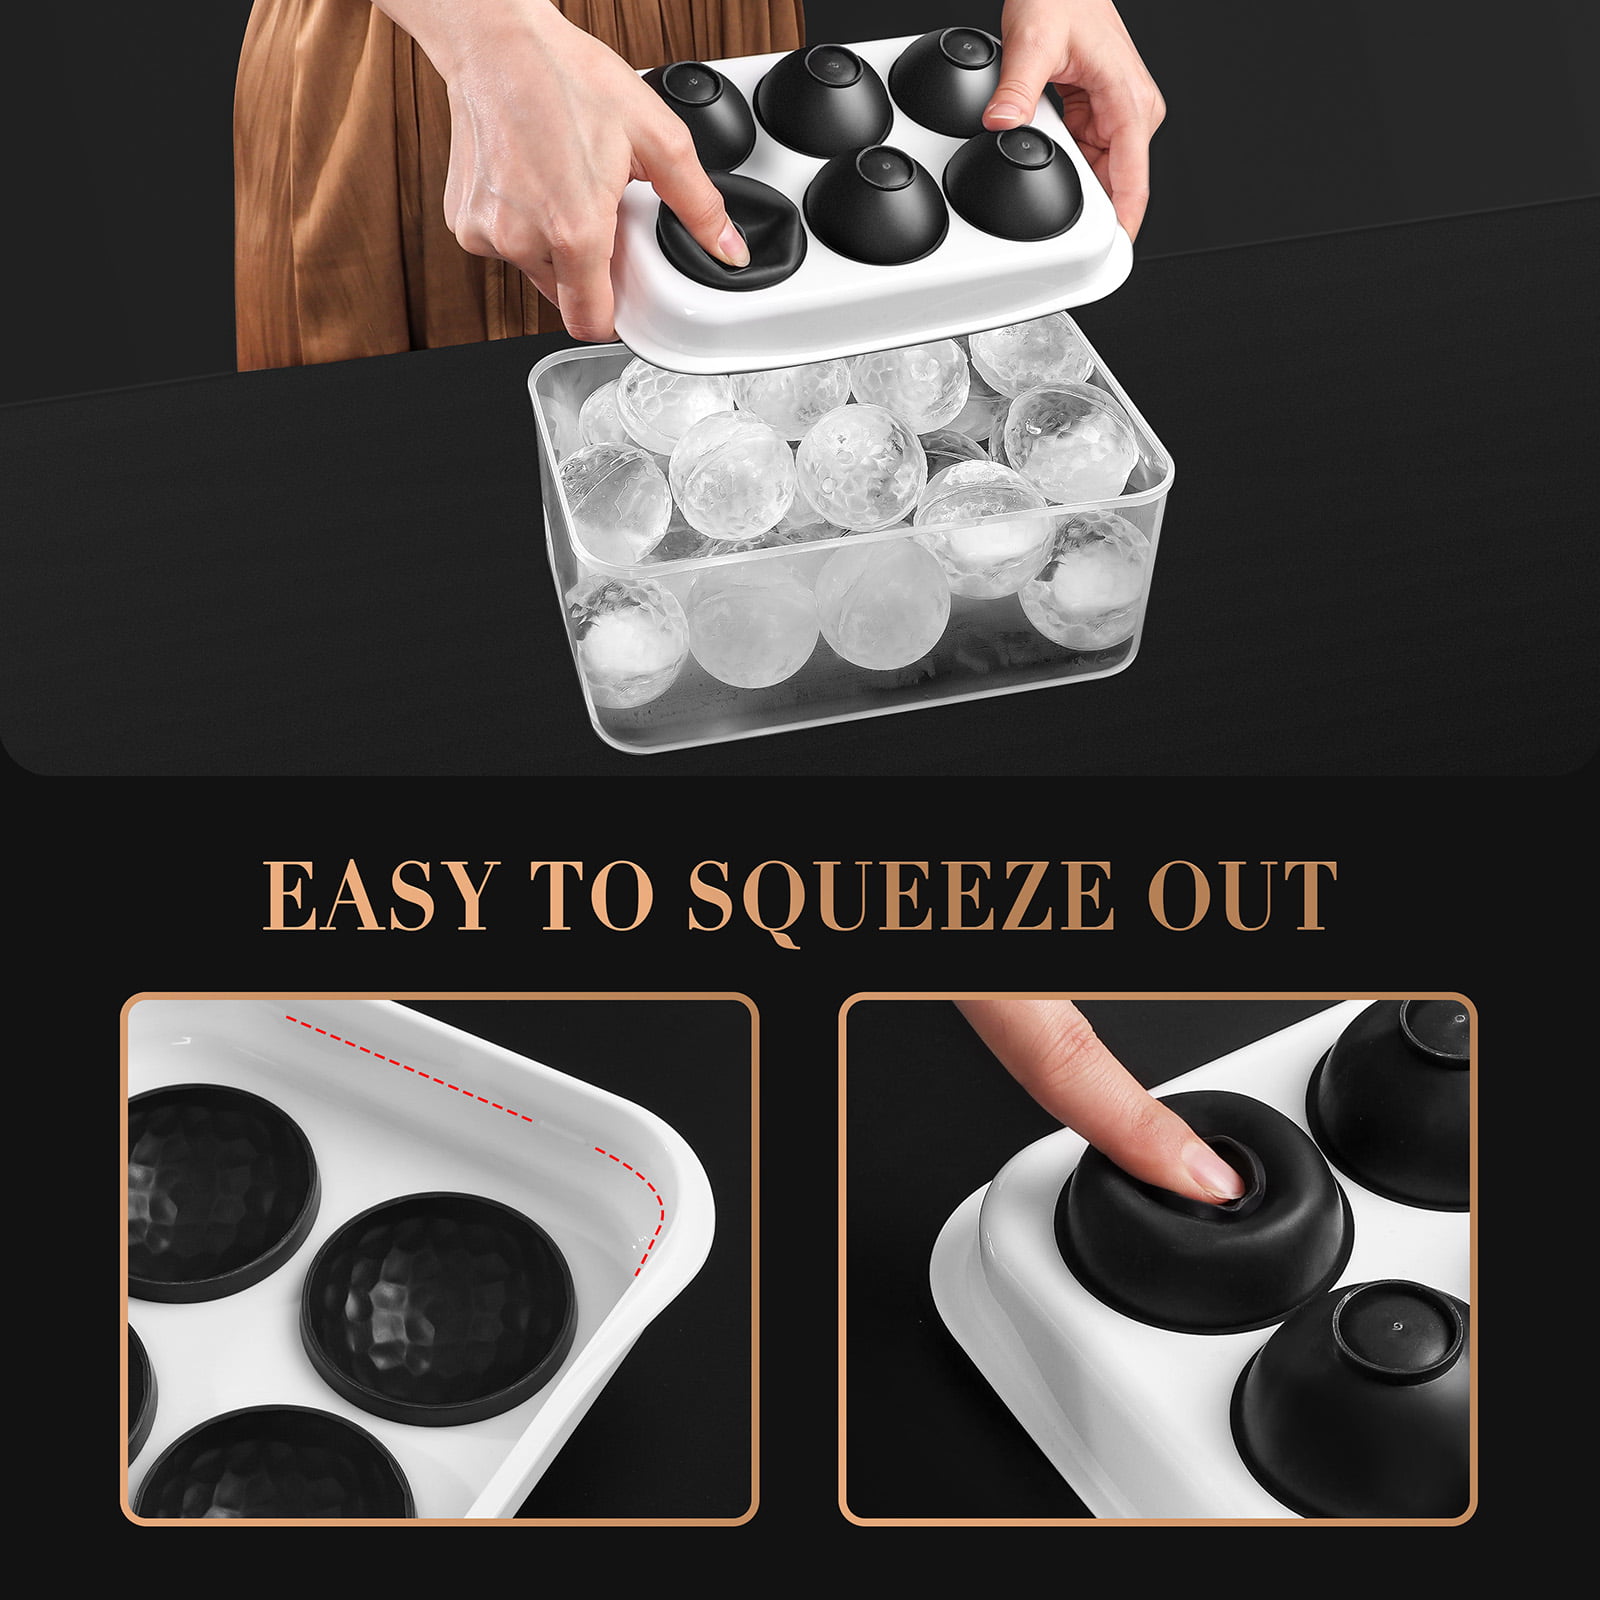 RYCORE Large Round Ice Cube Mold with Bin - 2.5 inch Whiskey Ice Ball Mold - Sphere Ice Mold for Cocktails - Easy Fill System , Black, Size: 10.000 x 6.500 x